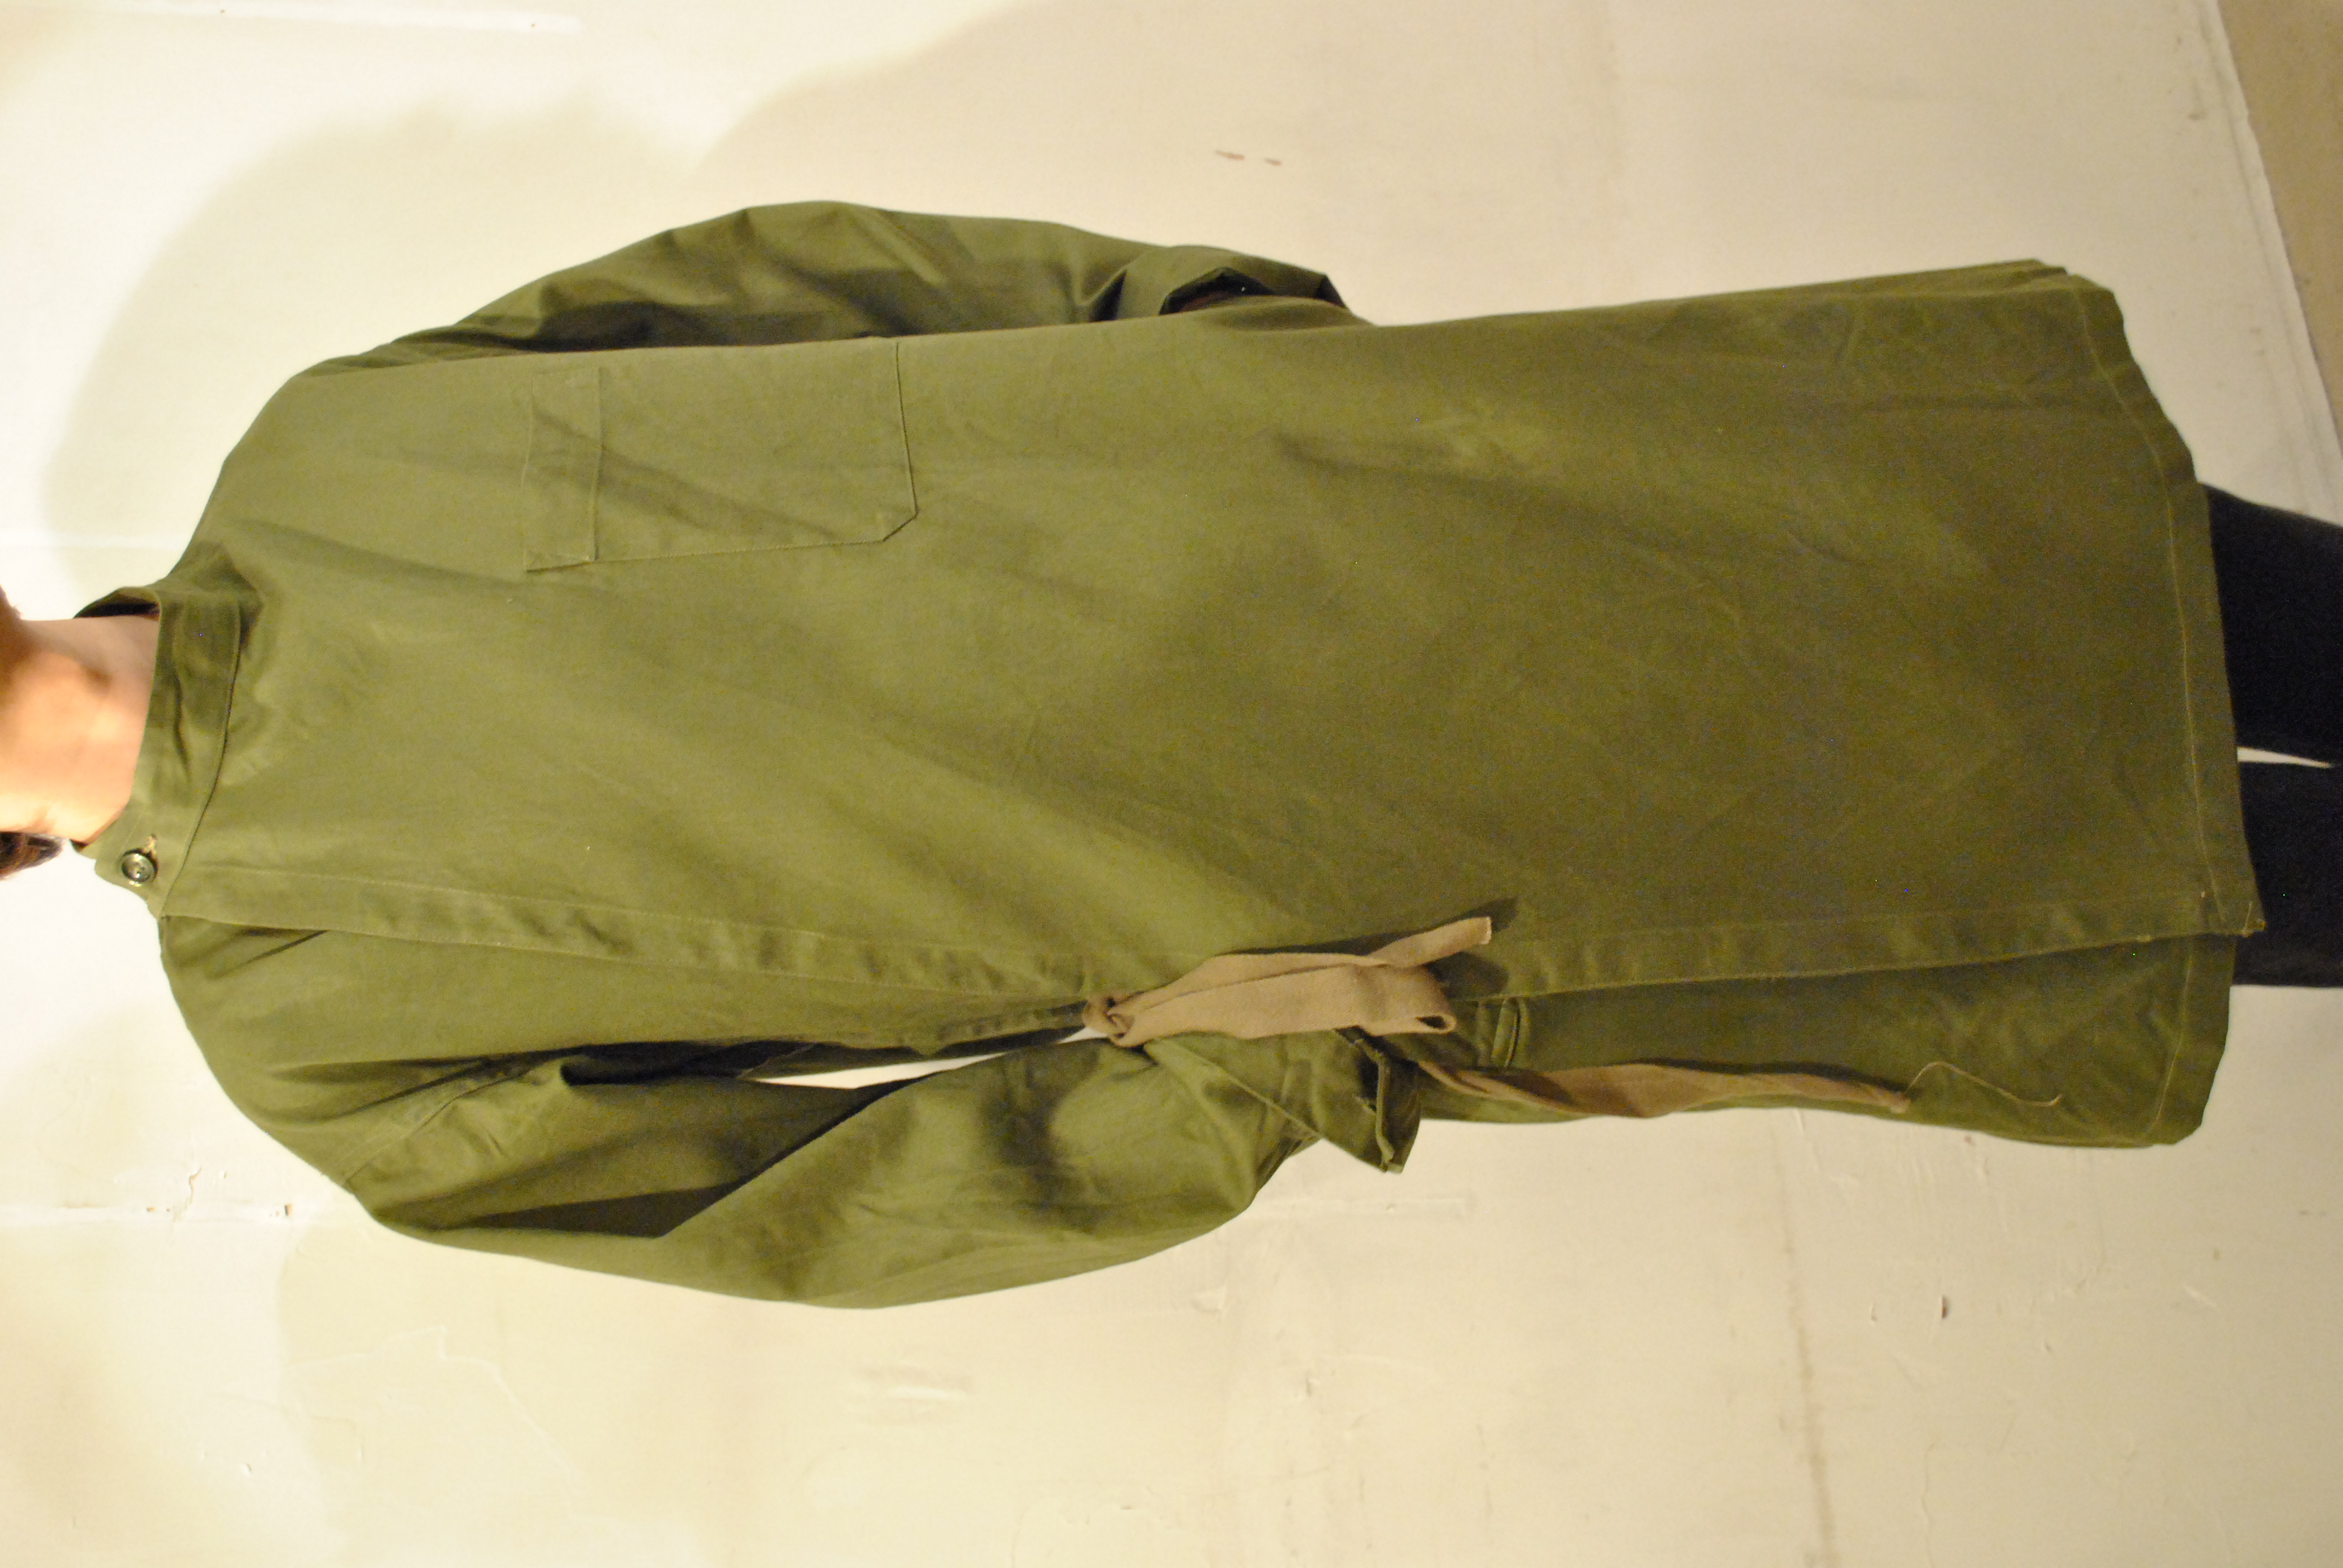 60's Deadstock British Army Nursing Gown」 - CROUT